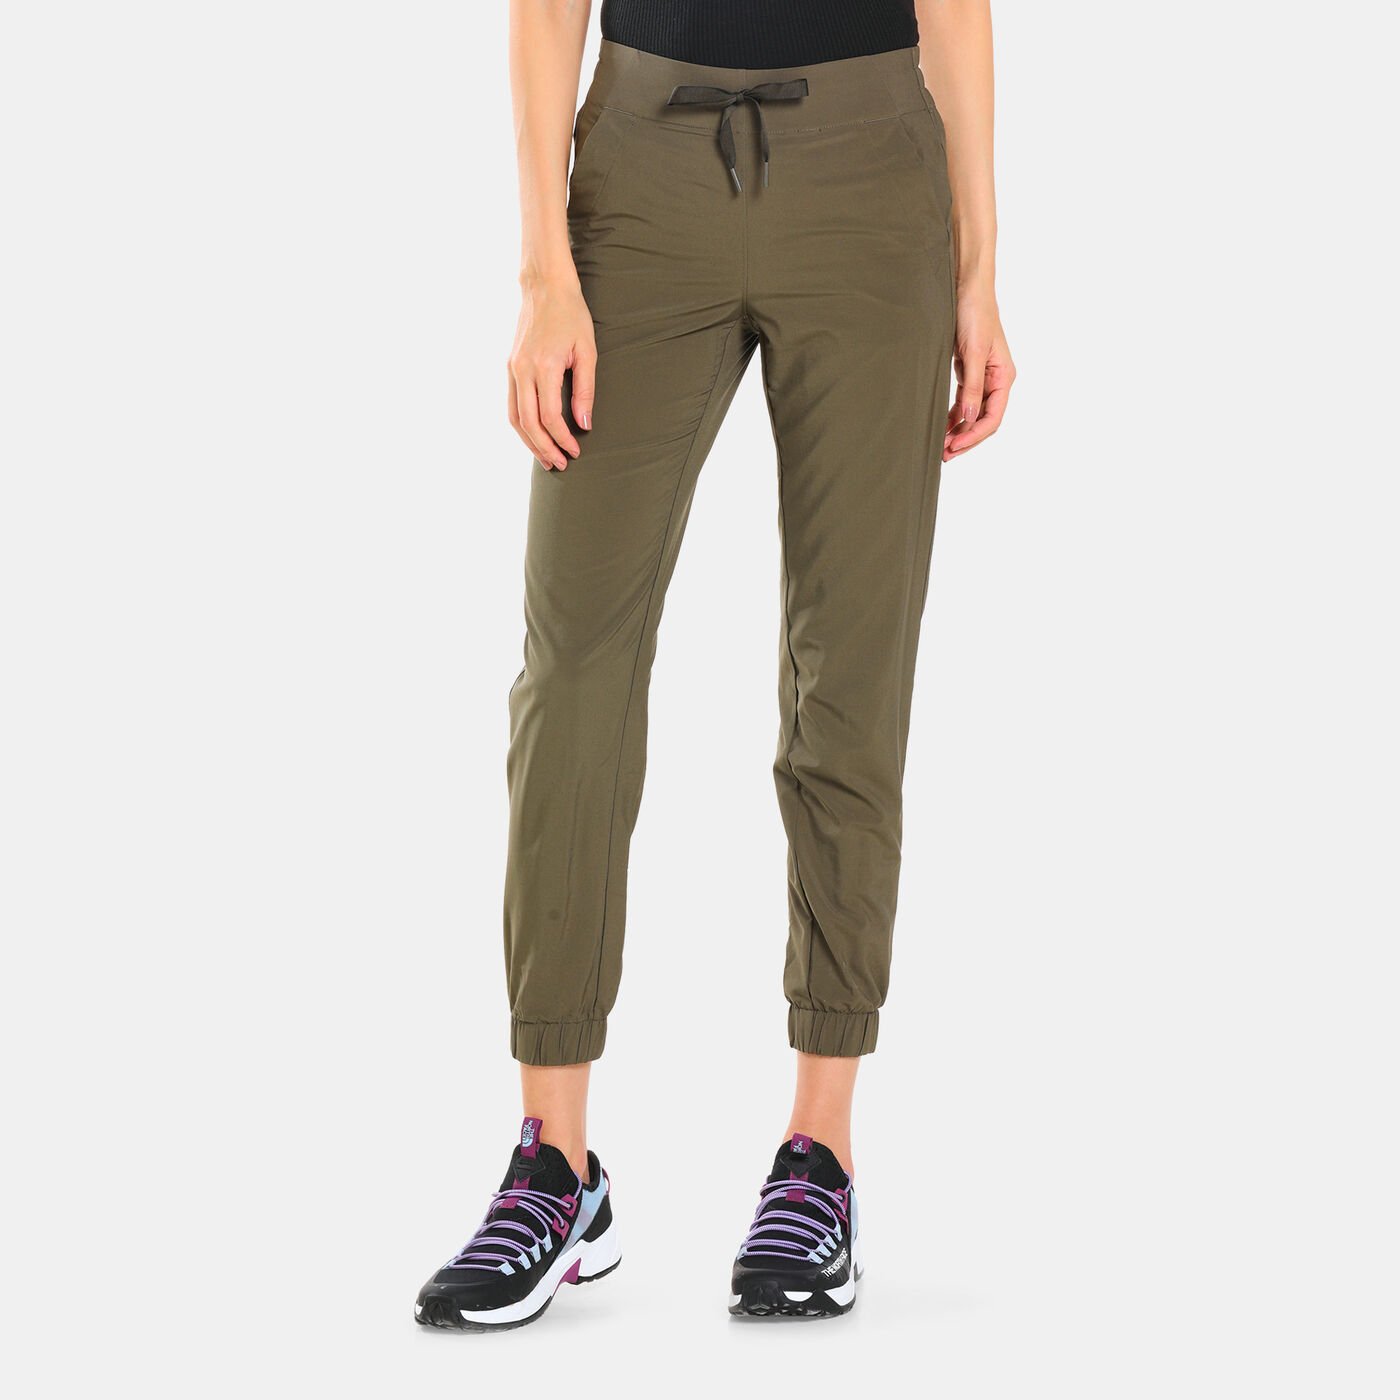 Women's Rise And Align Sweatpants